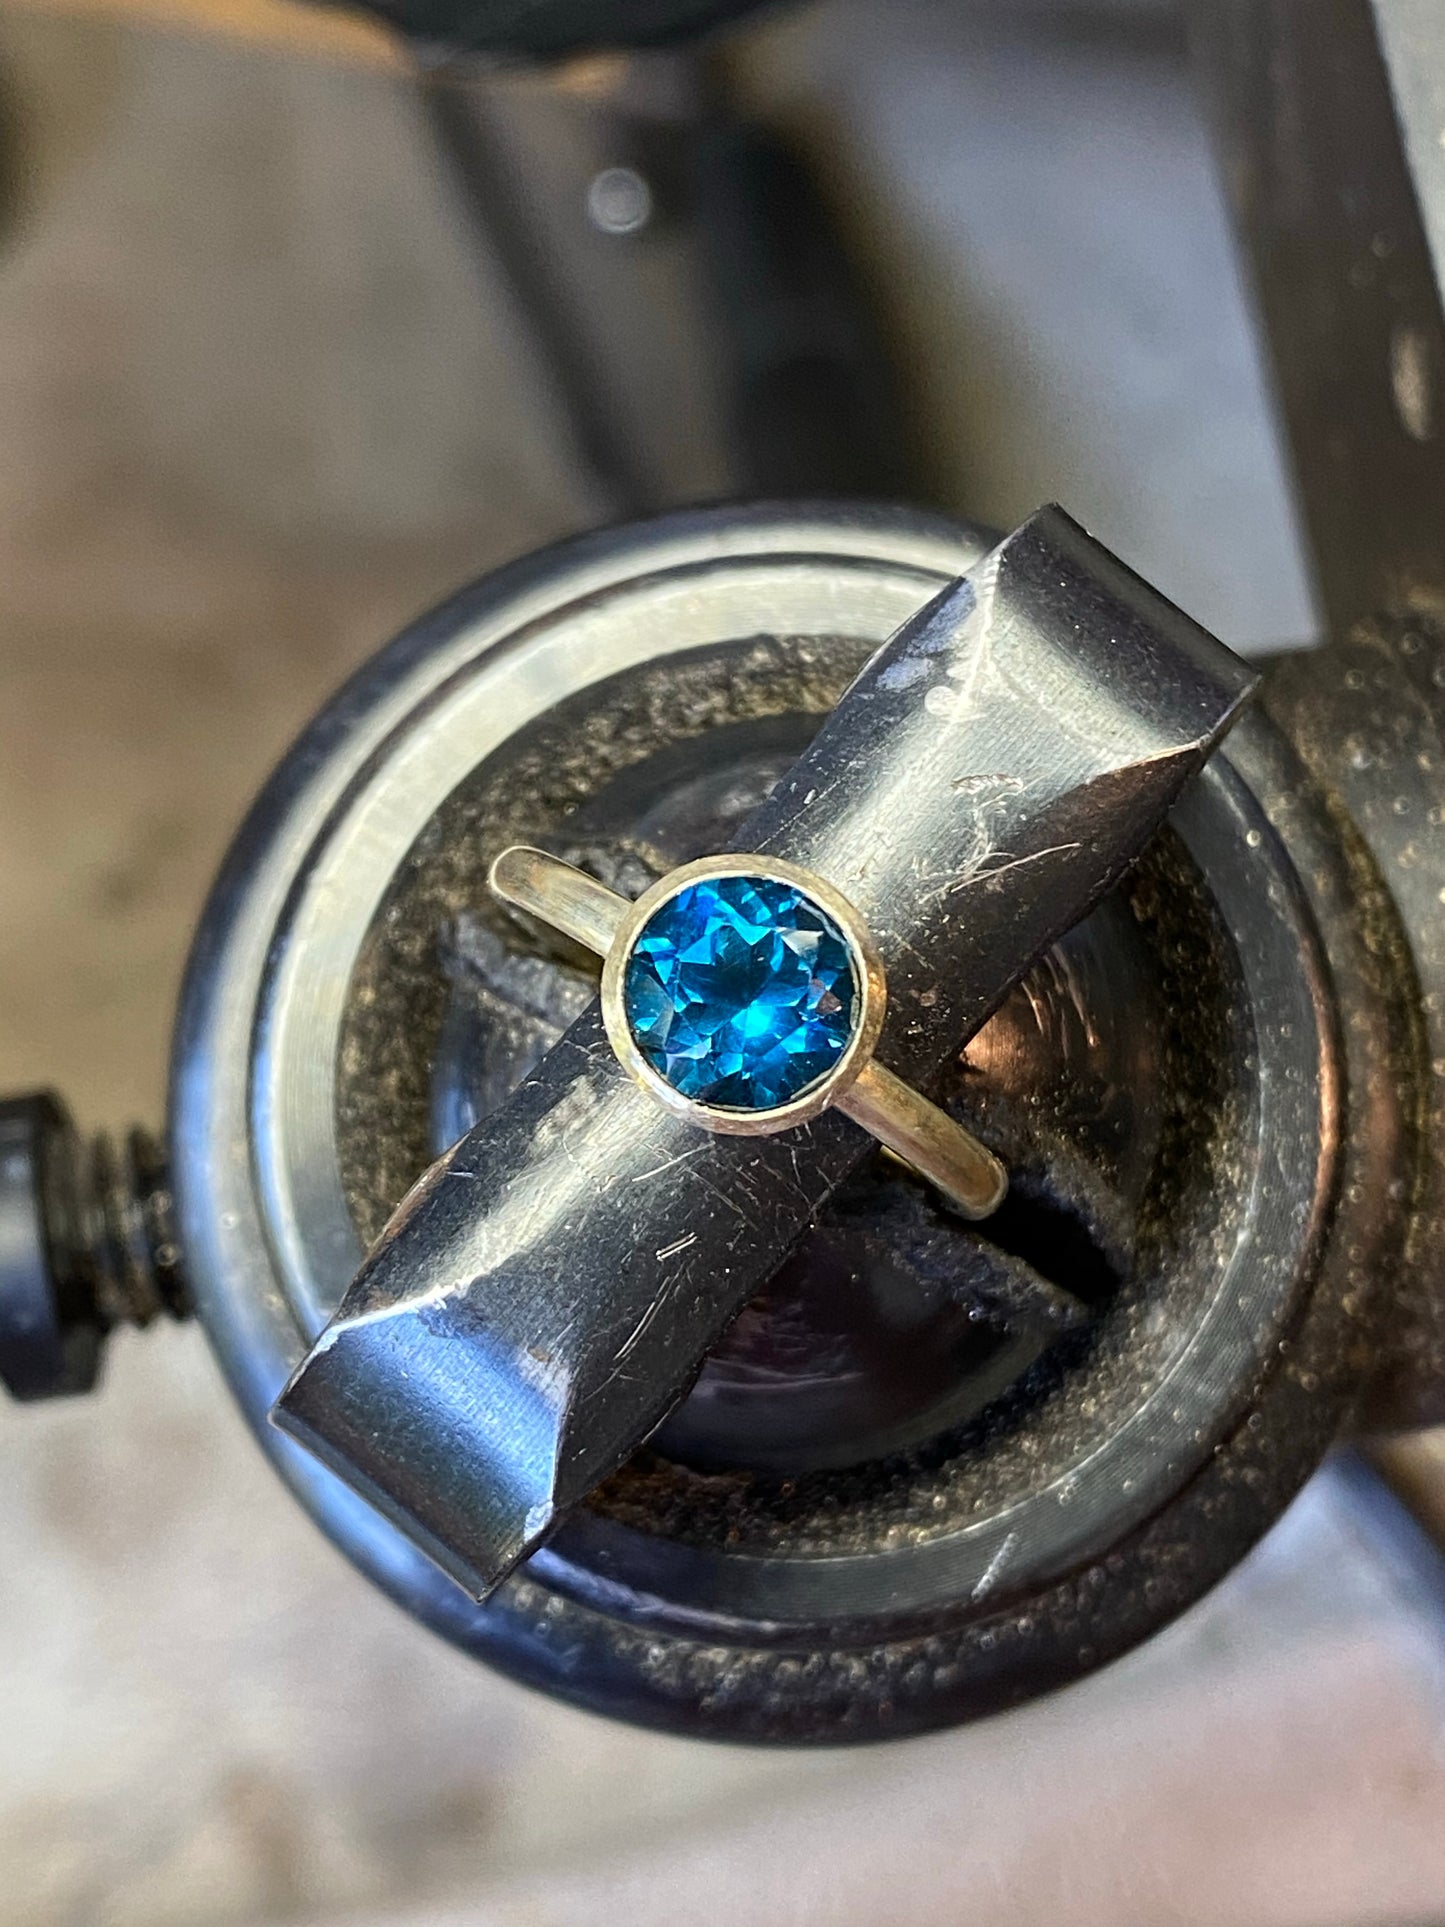 14k yellow gold ring set with a london blue topaz